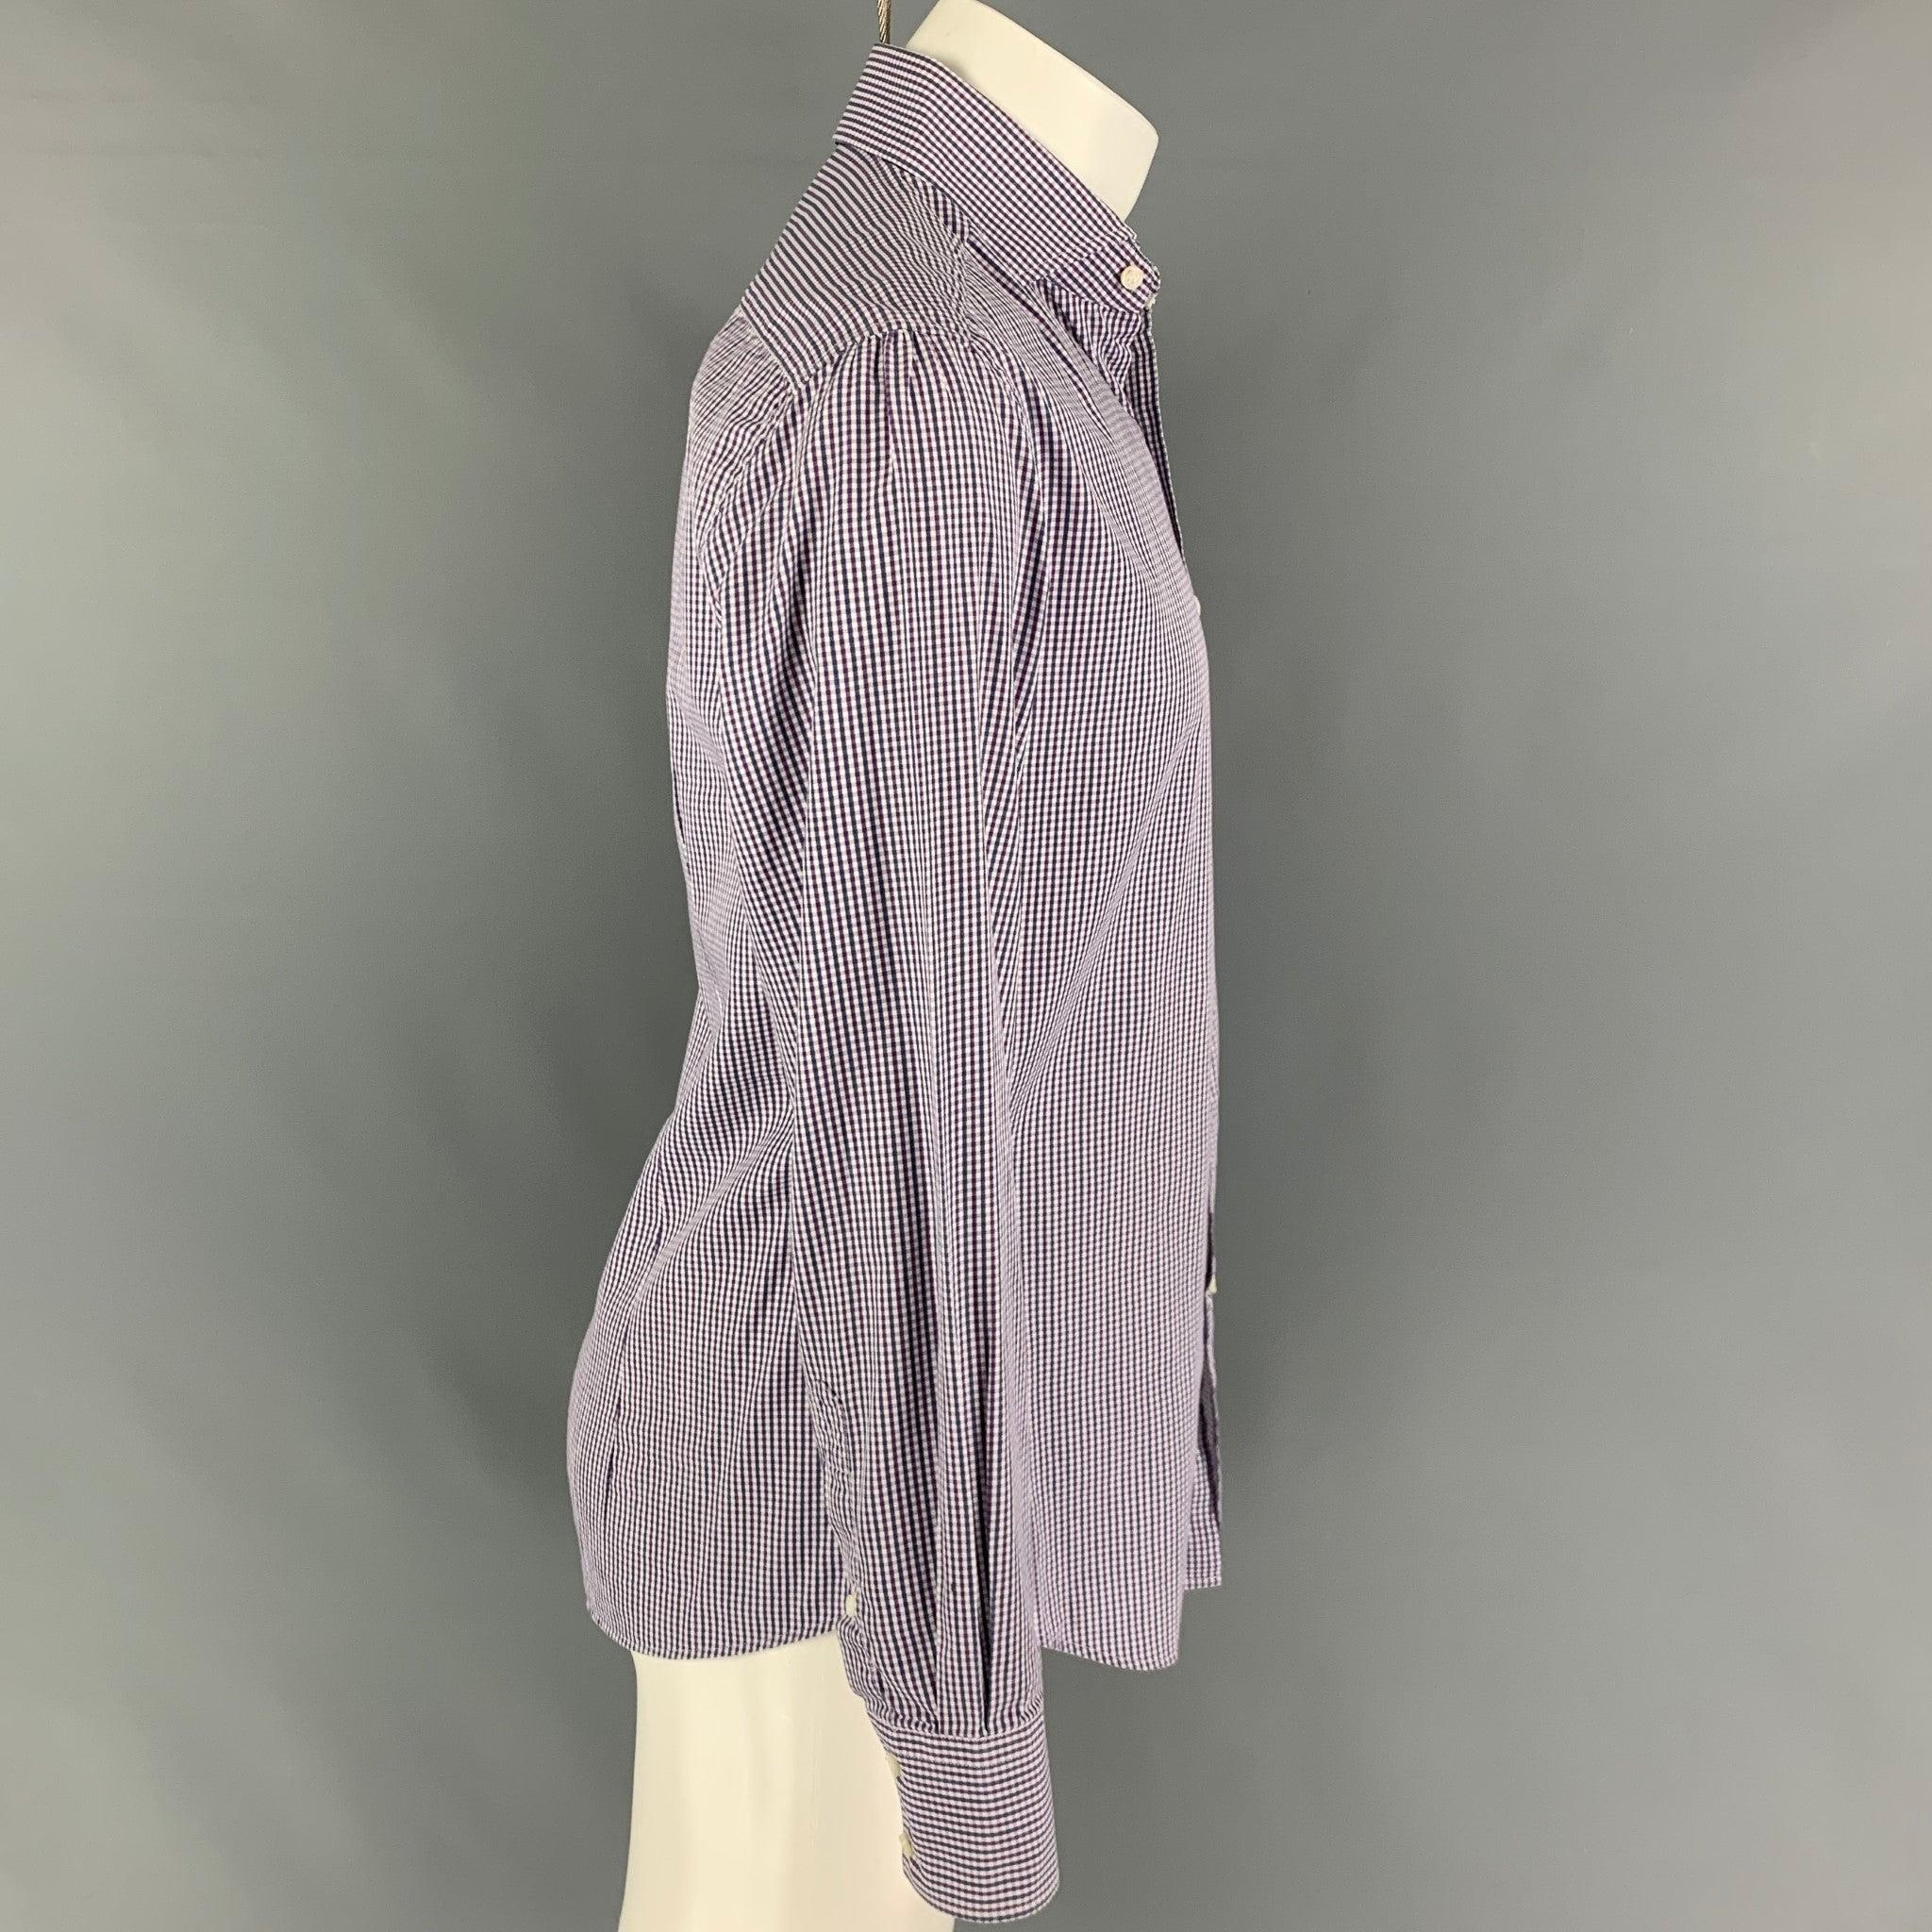 BRUNELLO CUCINELLI long sleeve shirt comes in a navy & purple checkered cotton featuring a slim fit, spread collar, and a button up closure. Made in Italy.
Very Good
Pre-Owned Condition.  

Marked:   M 

Measurements: 
 
Shoulder: 18 inches  Chest: